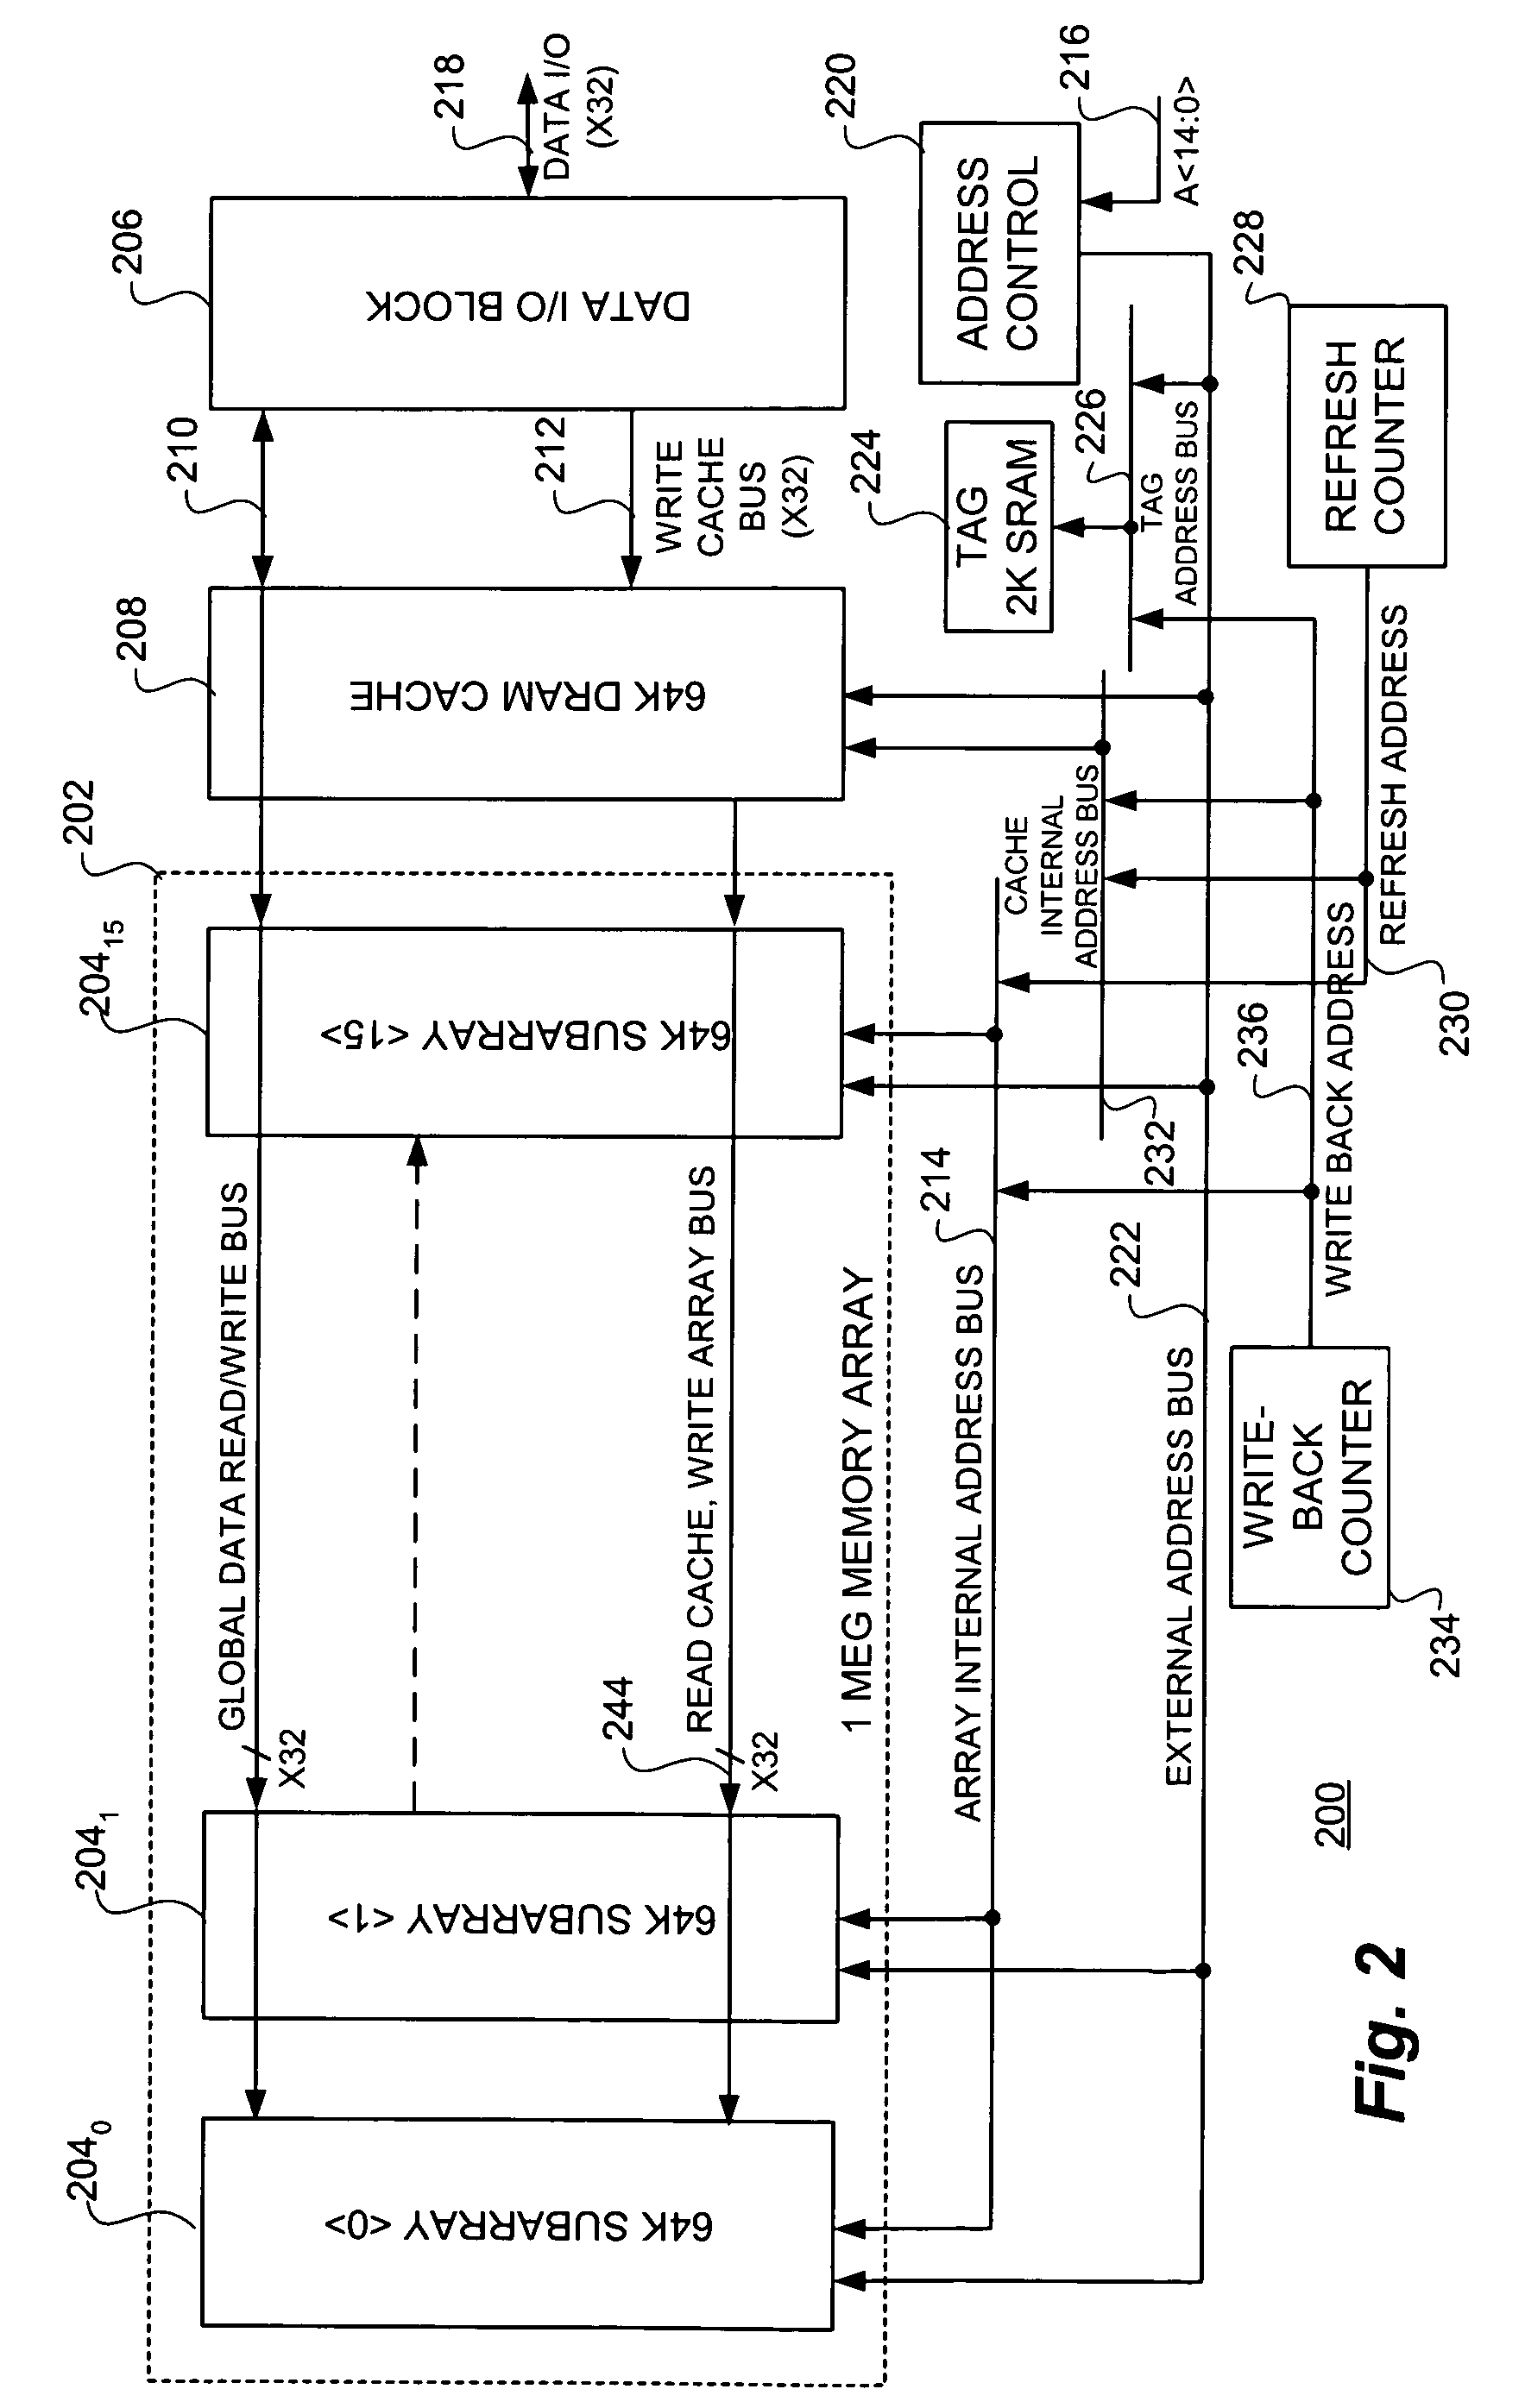 Static random access memory (SRAM) compatible, high availability memory array and method employing synchronous dynamic random access memory (DRAM) in conjunction with a single DRAM cache and tag